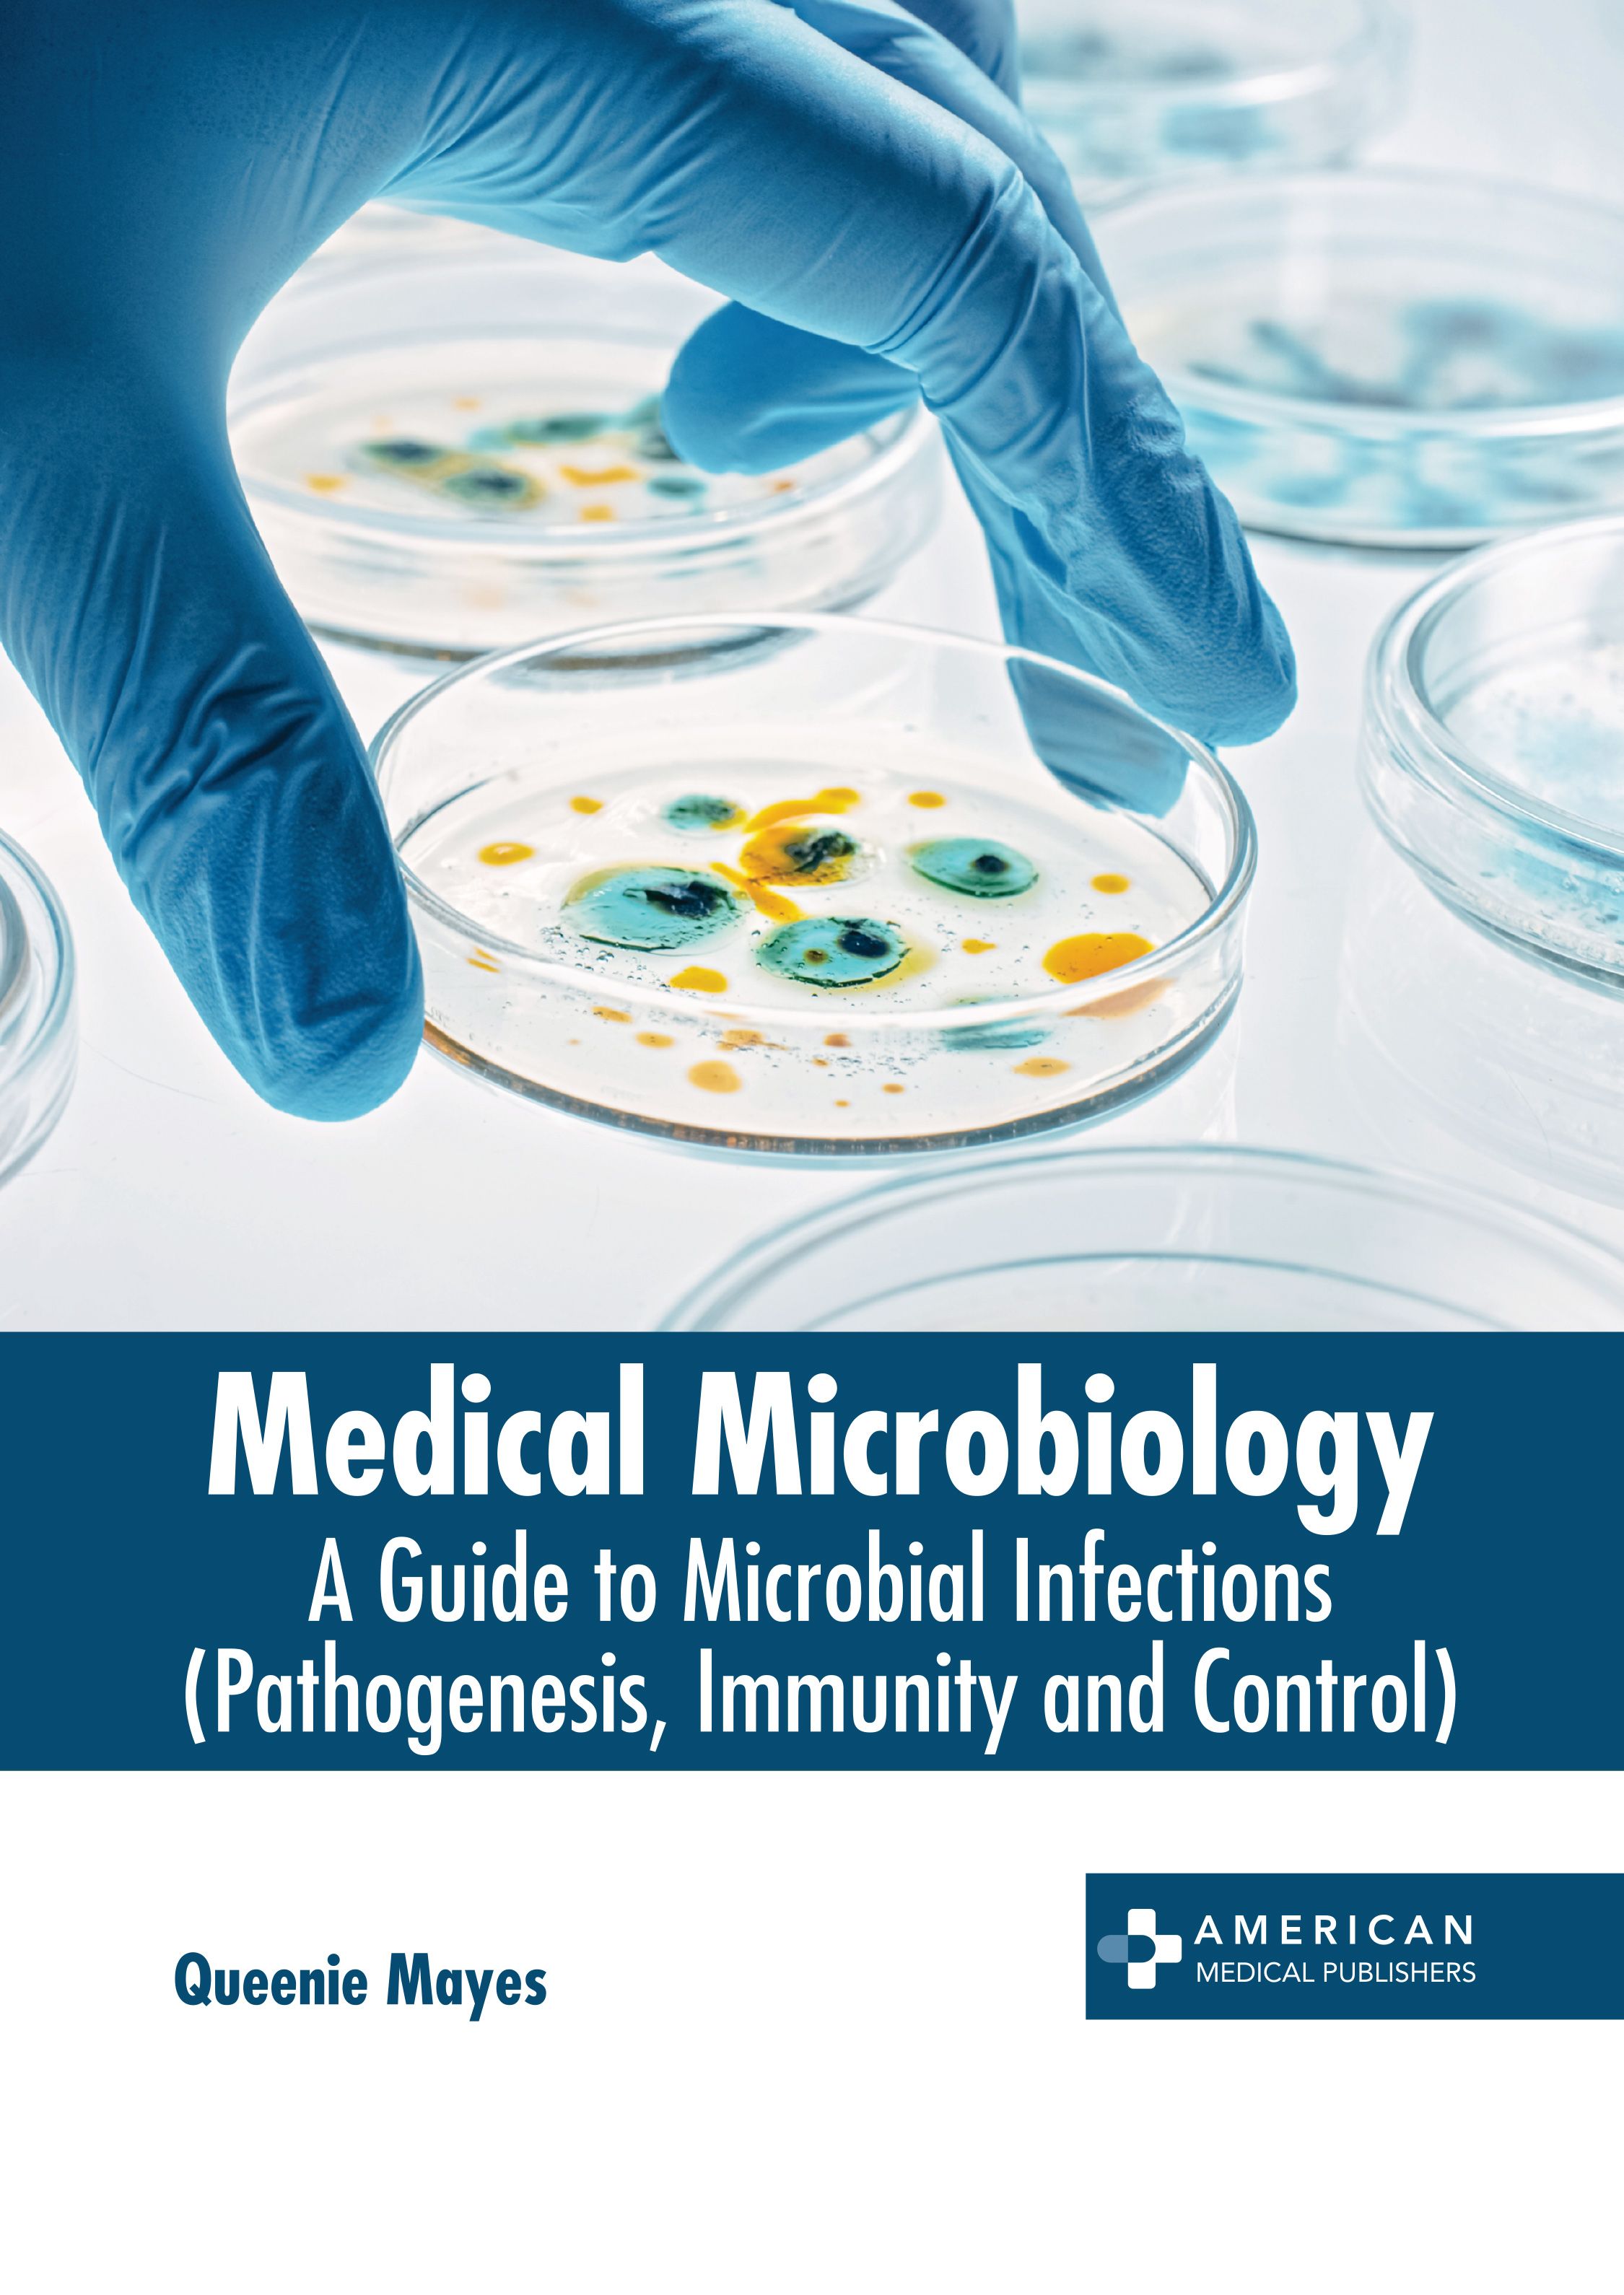 MEDICAL MICROBIOLOGY: A GUIDE TO MICROBIAL INFECTIONS